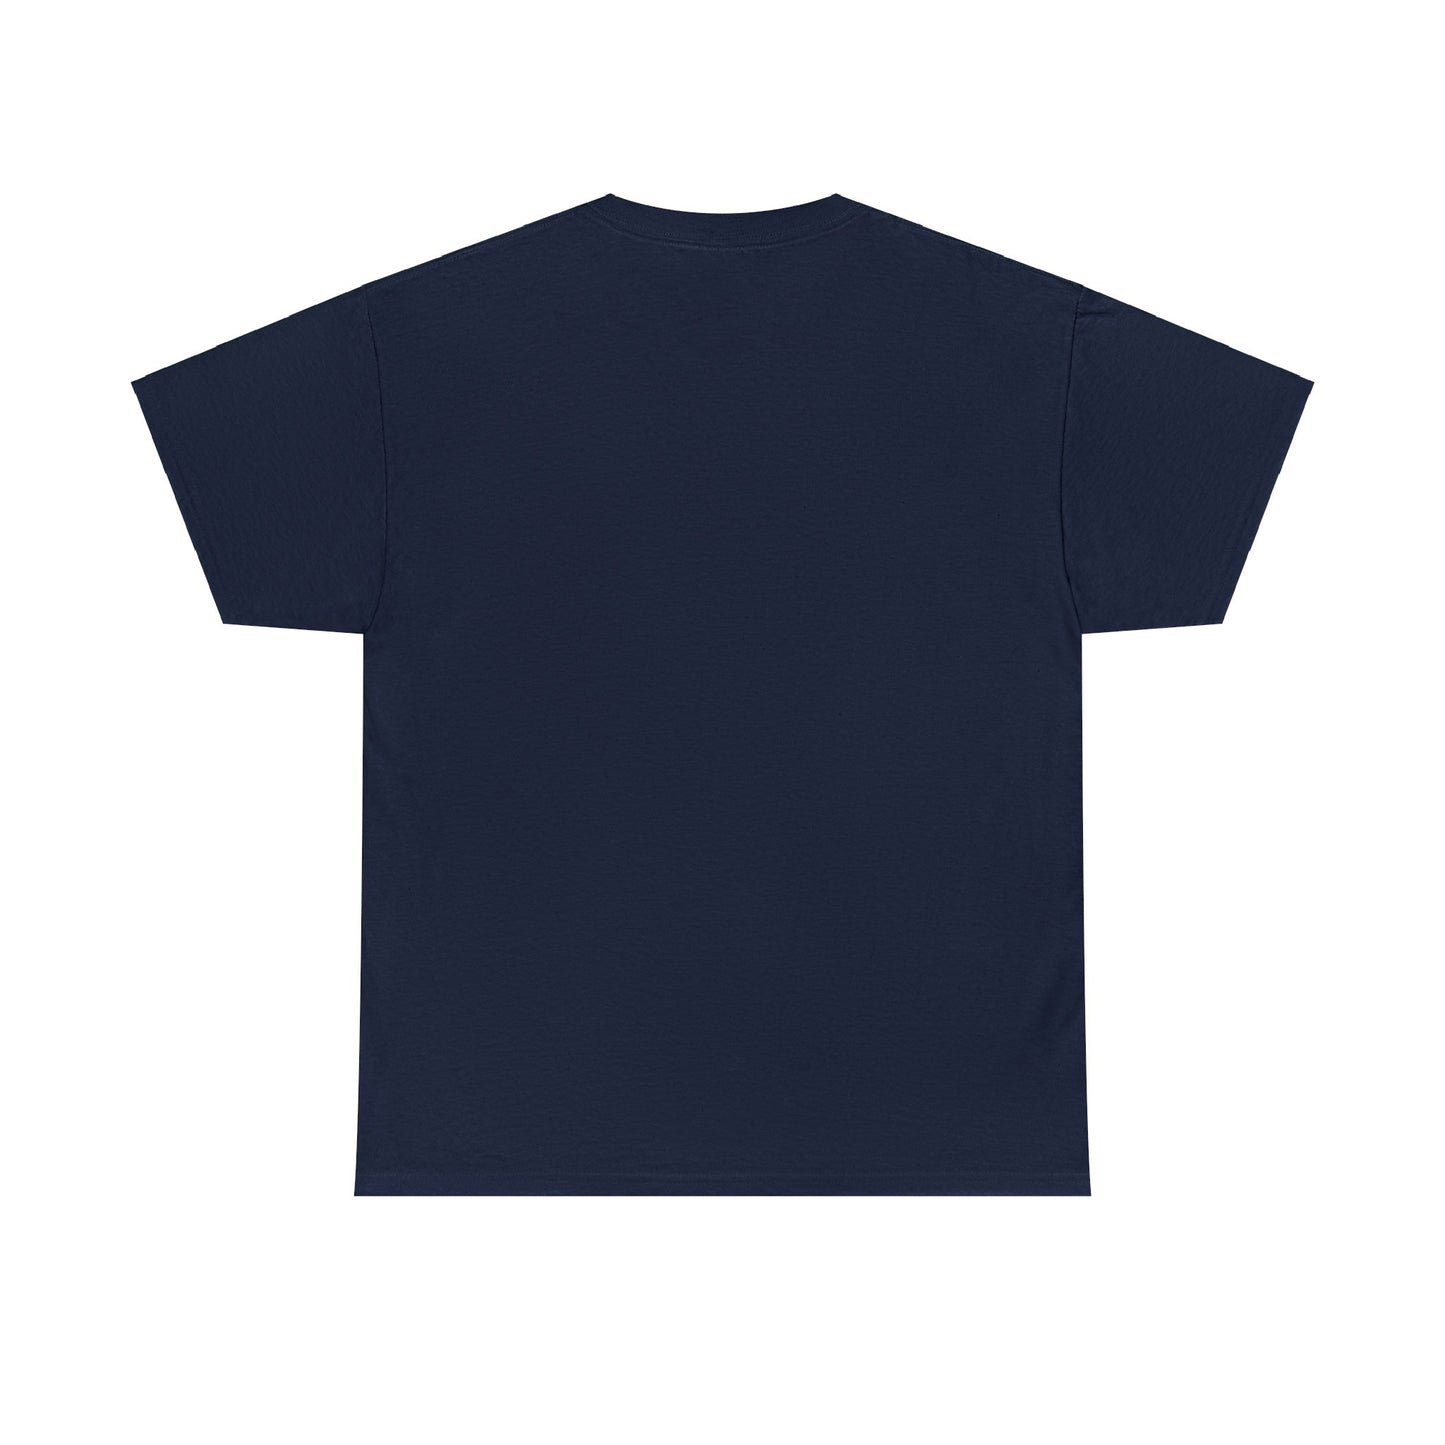 Cotton T-Shirt with Northern Beaches Freshwater logo